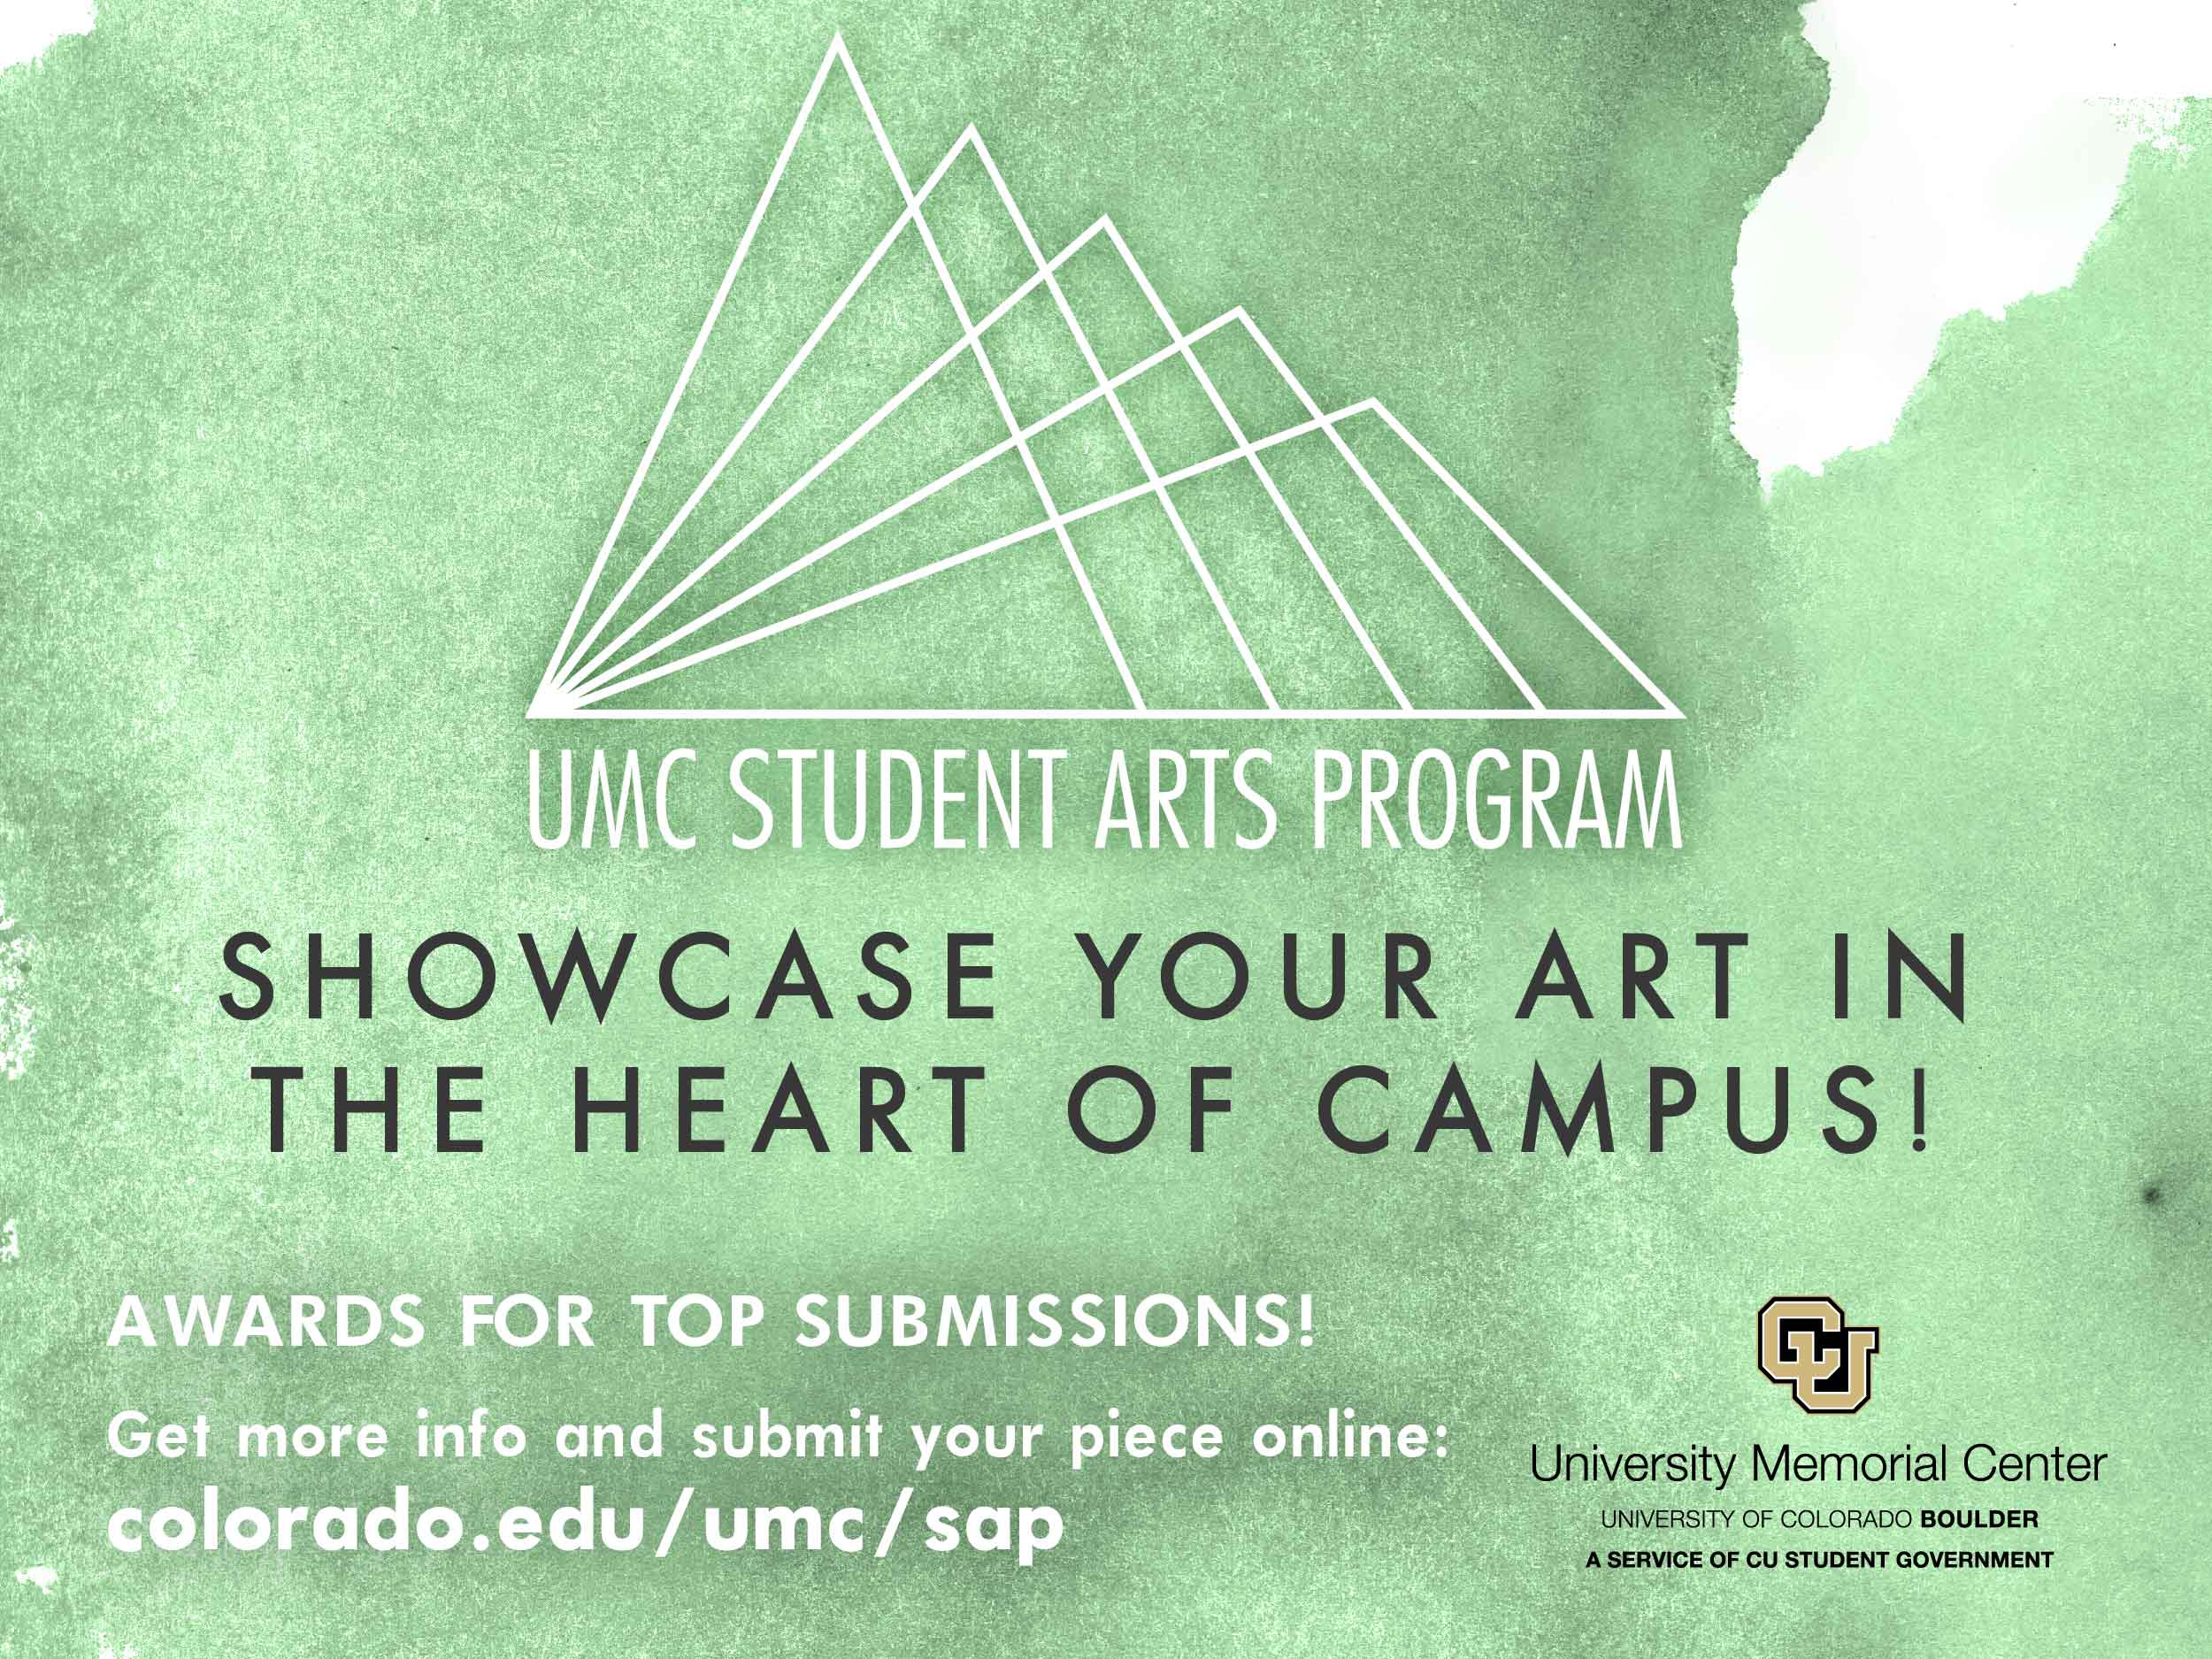 Showcase your art in the heart of campus!